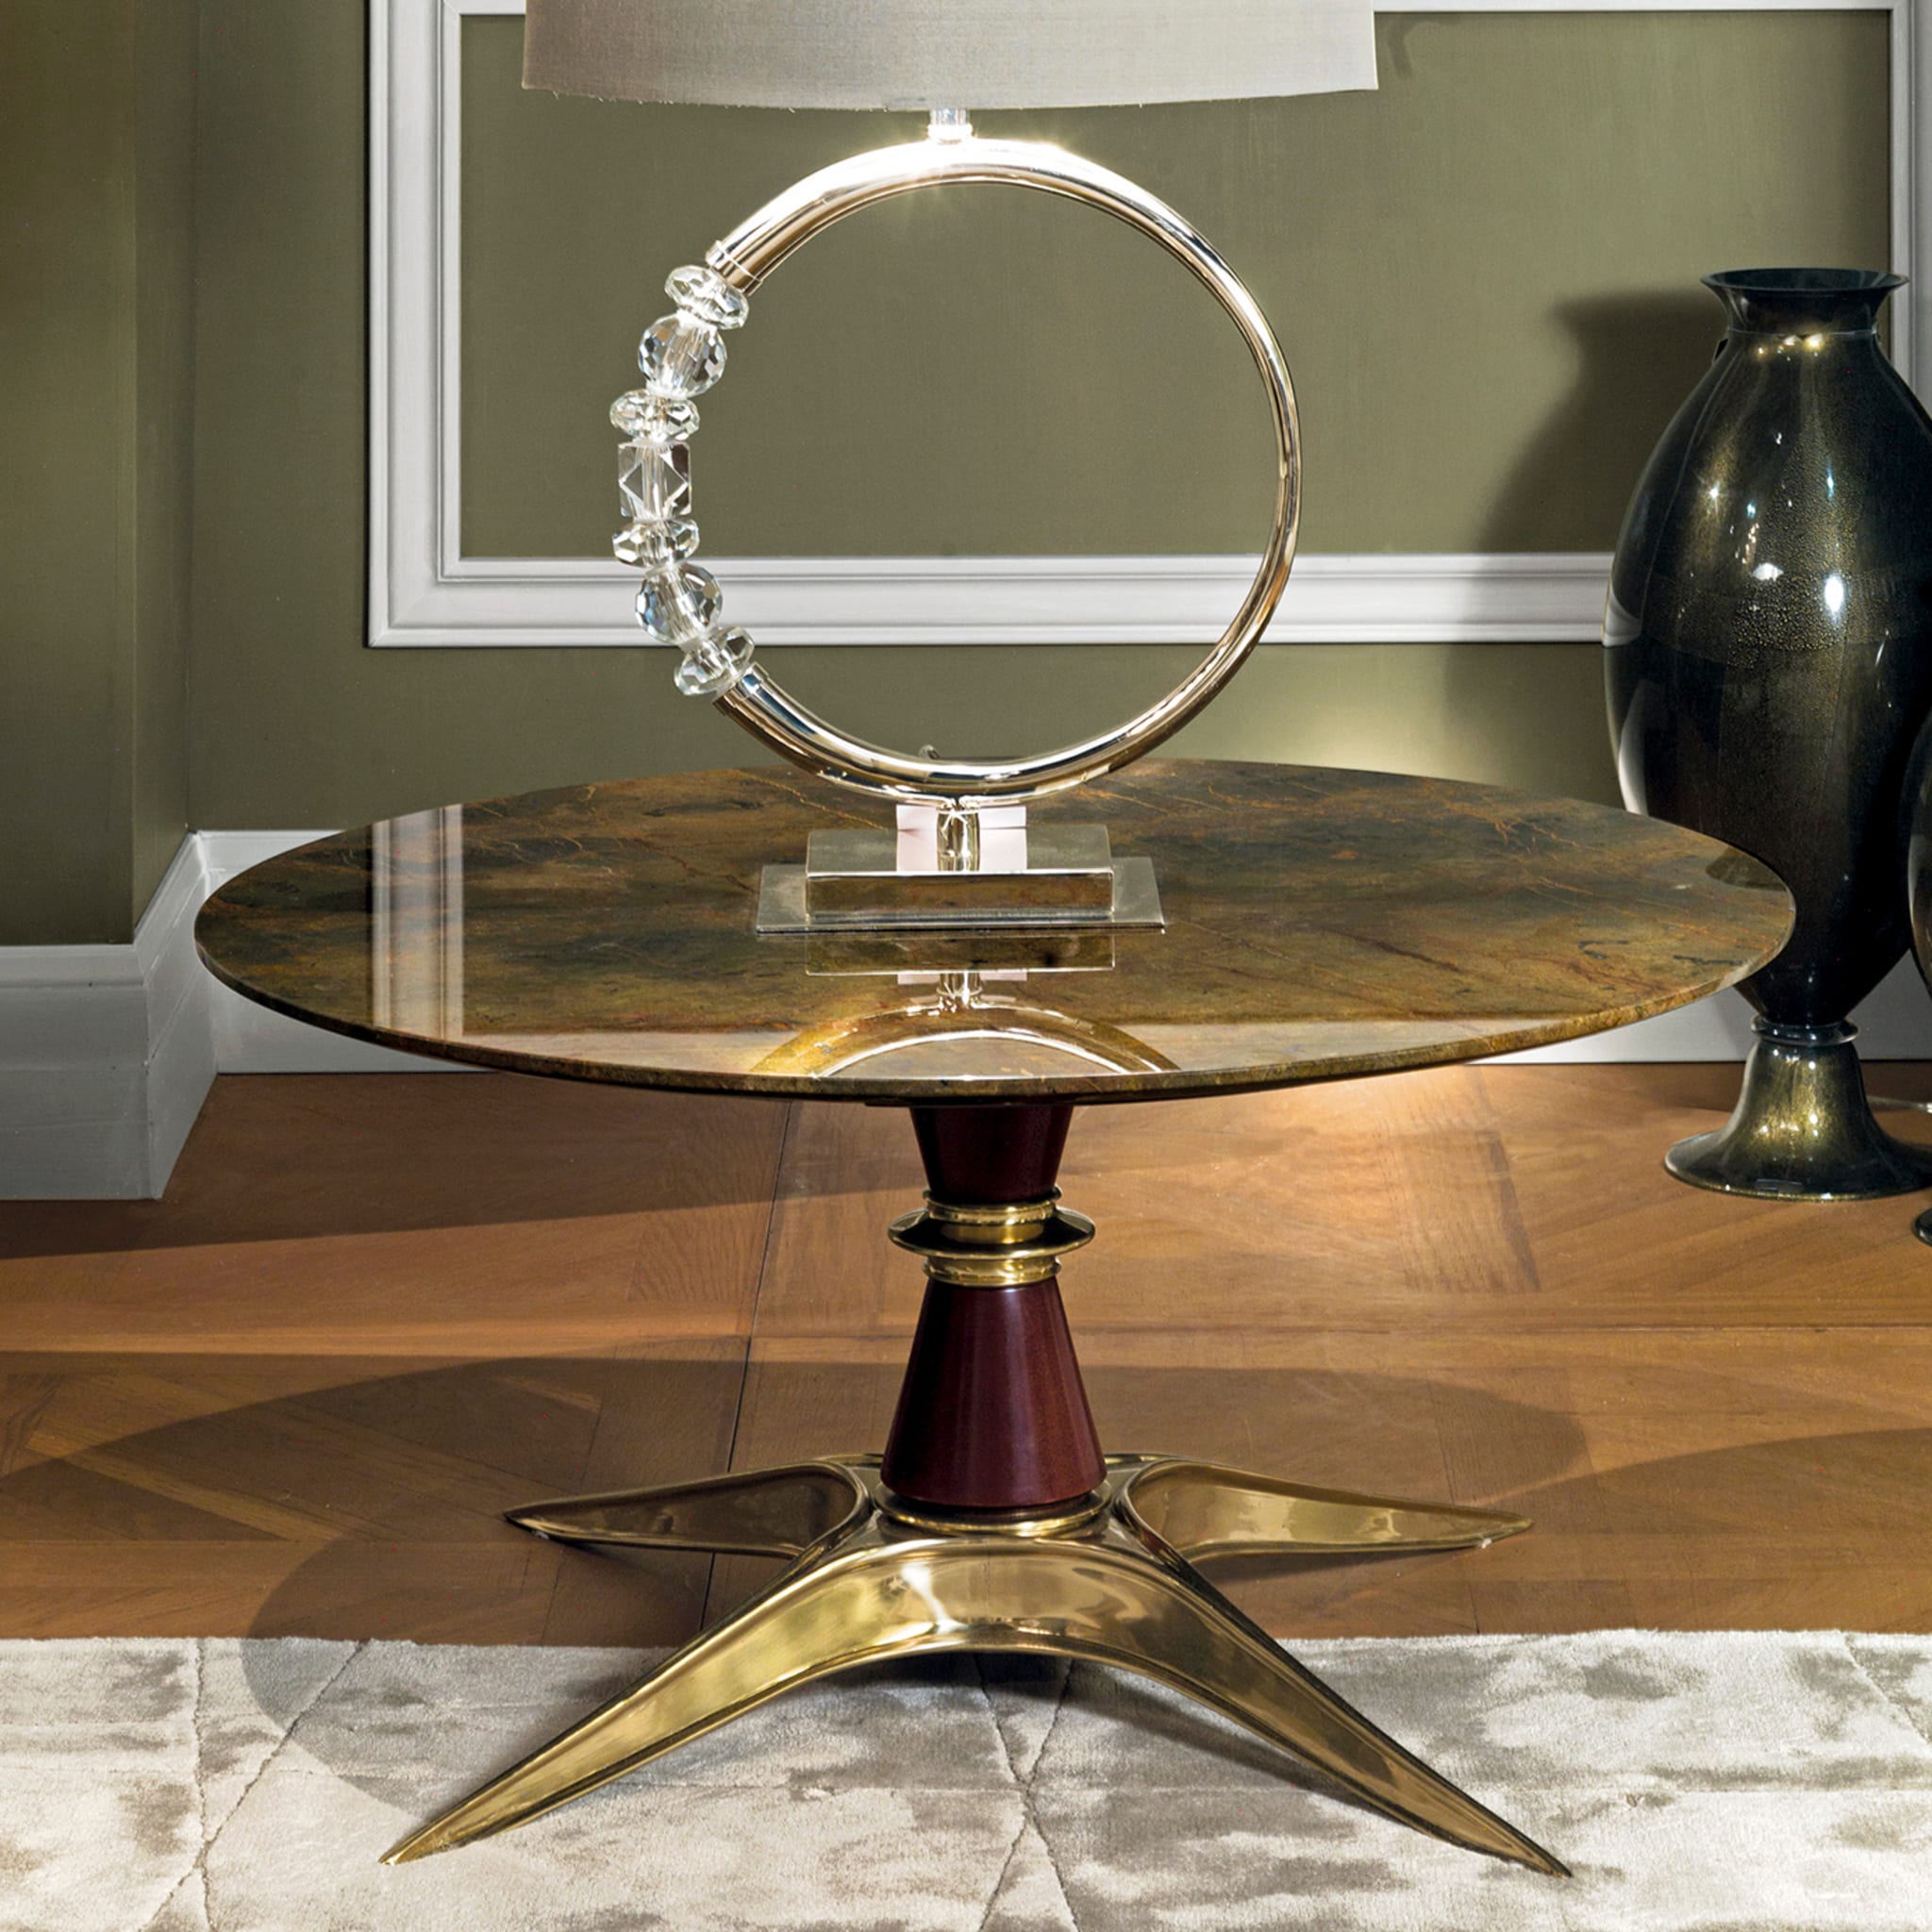 Brass and Tierra di Siena Side Table - Alternative view 1